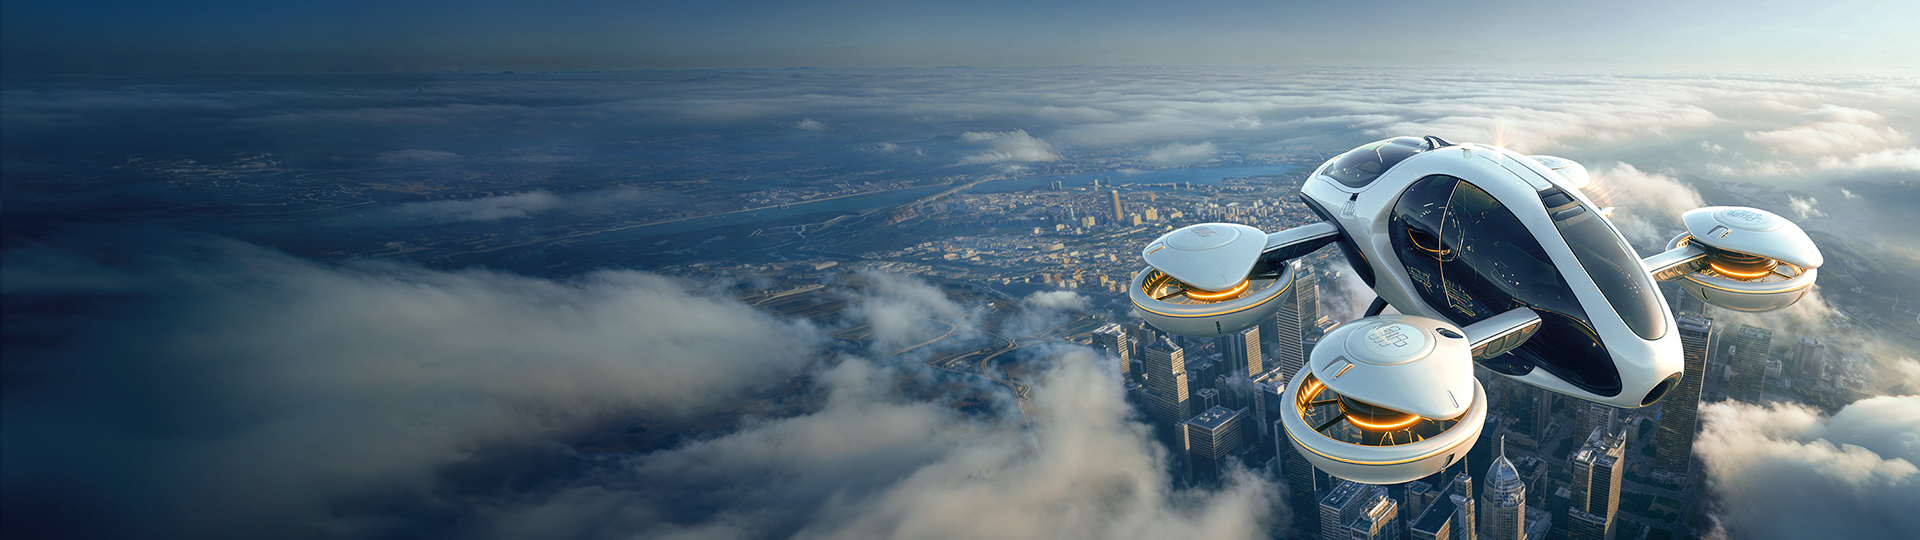 evtol in the skys above a city 